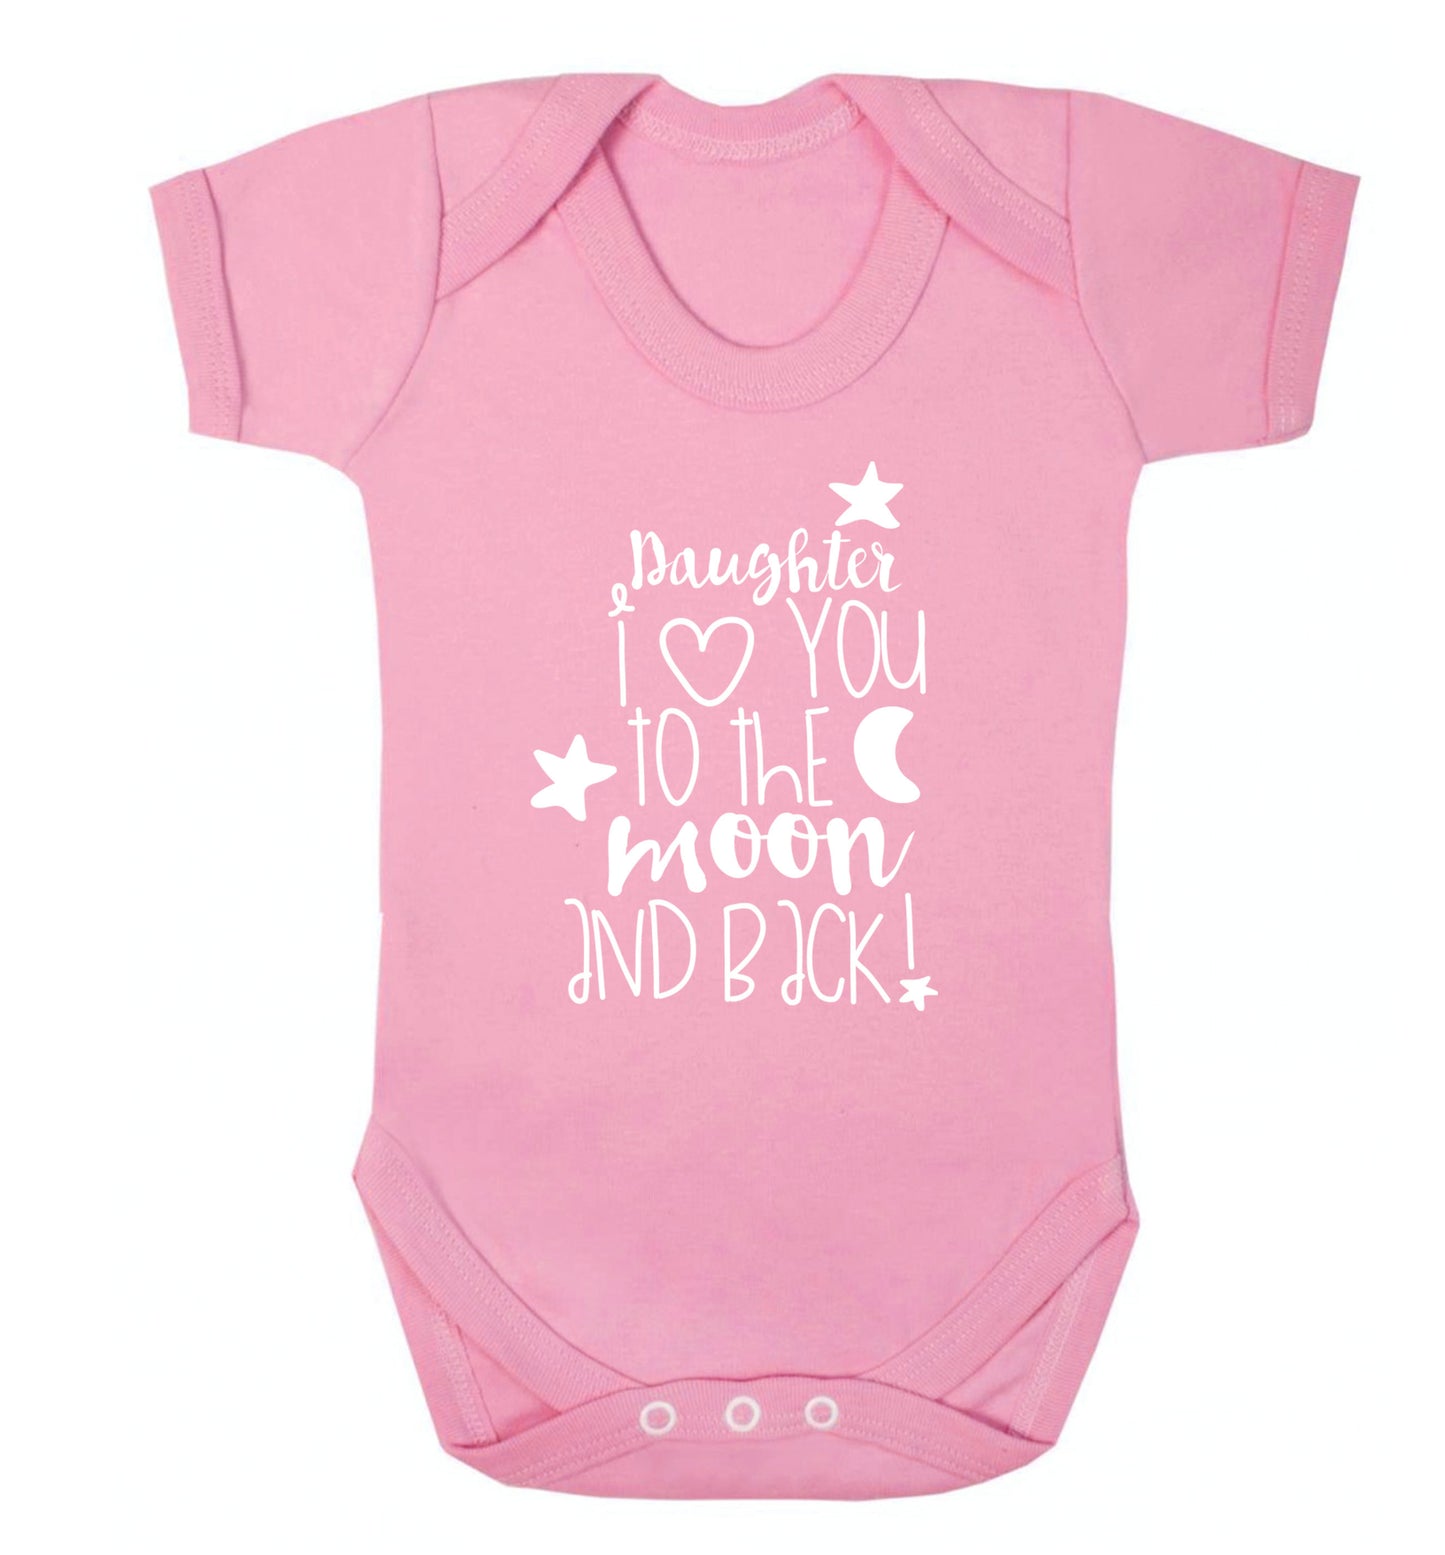 Daughter I love you to the moon and back Baby Vest pale pink 18-24 months